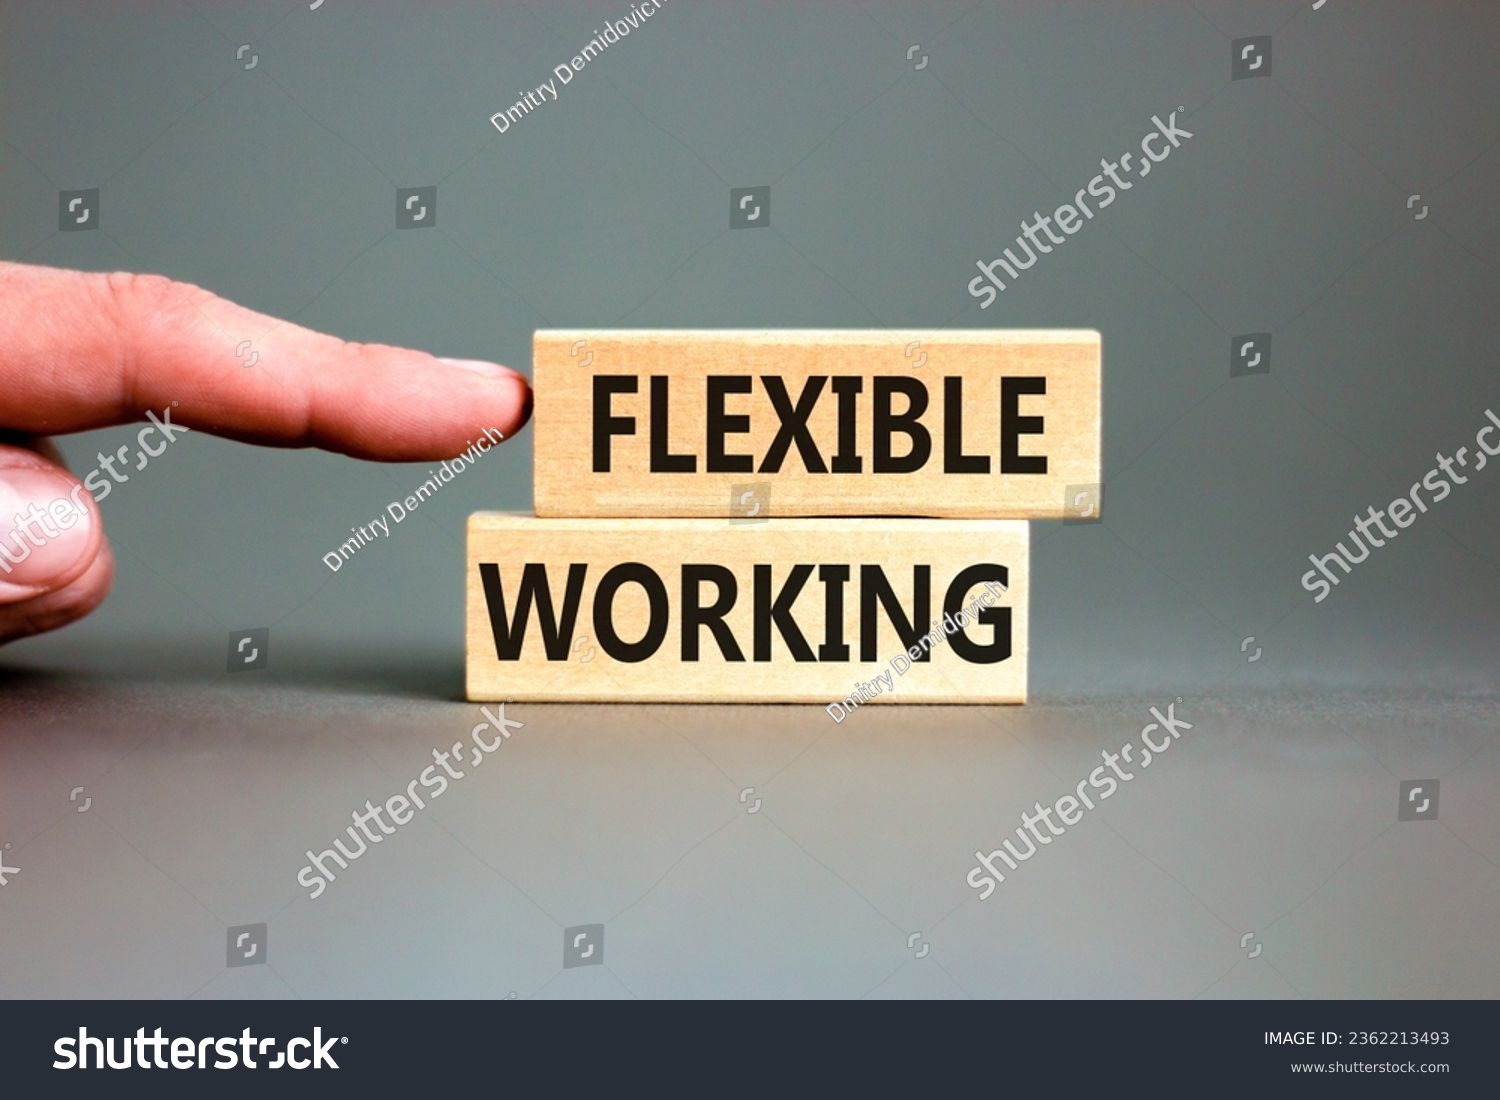 Flexible working symbol. Concept words Flexible working on beautiful wooden blocks. Beautiful grey table grey background. Businessman hand. Business flexible working concept. Copy space. #2362213493